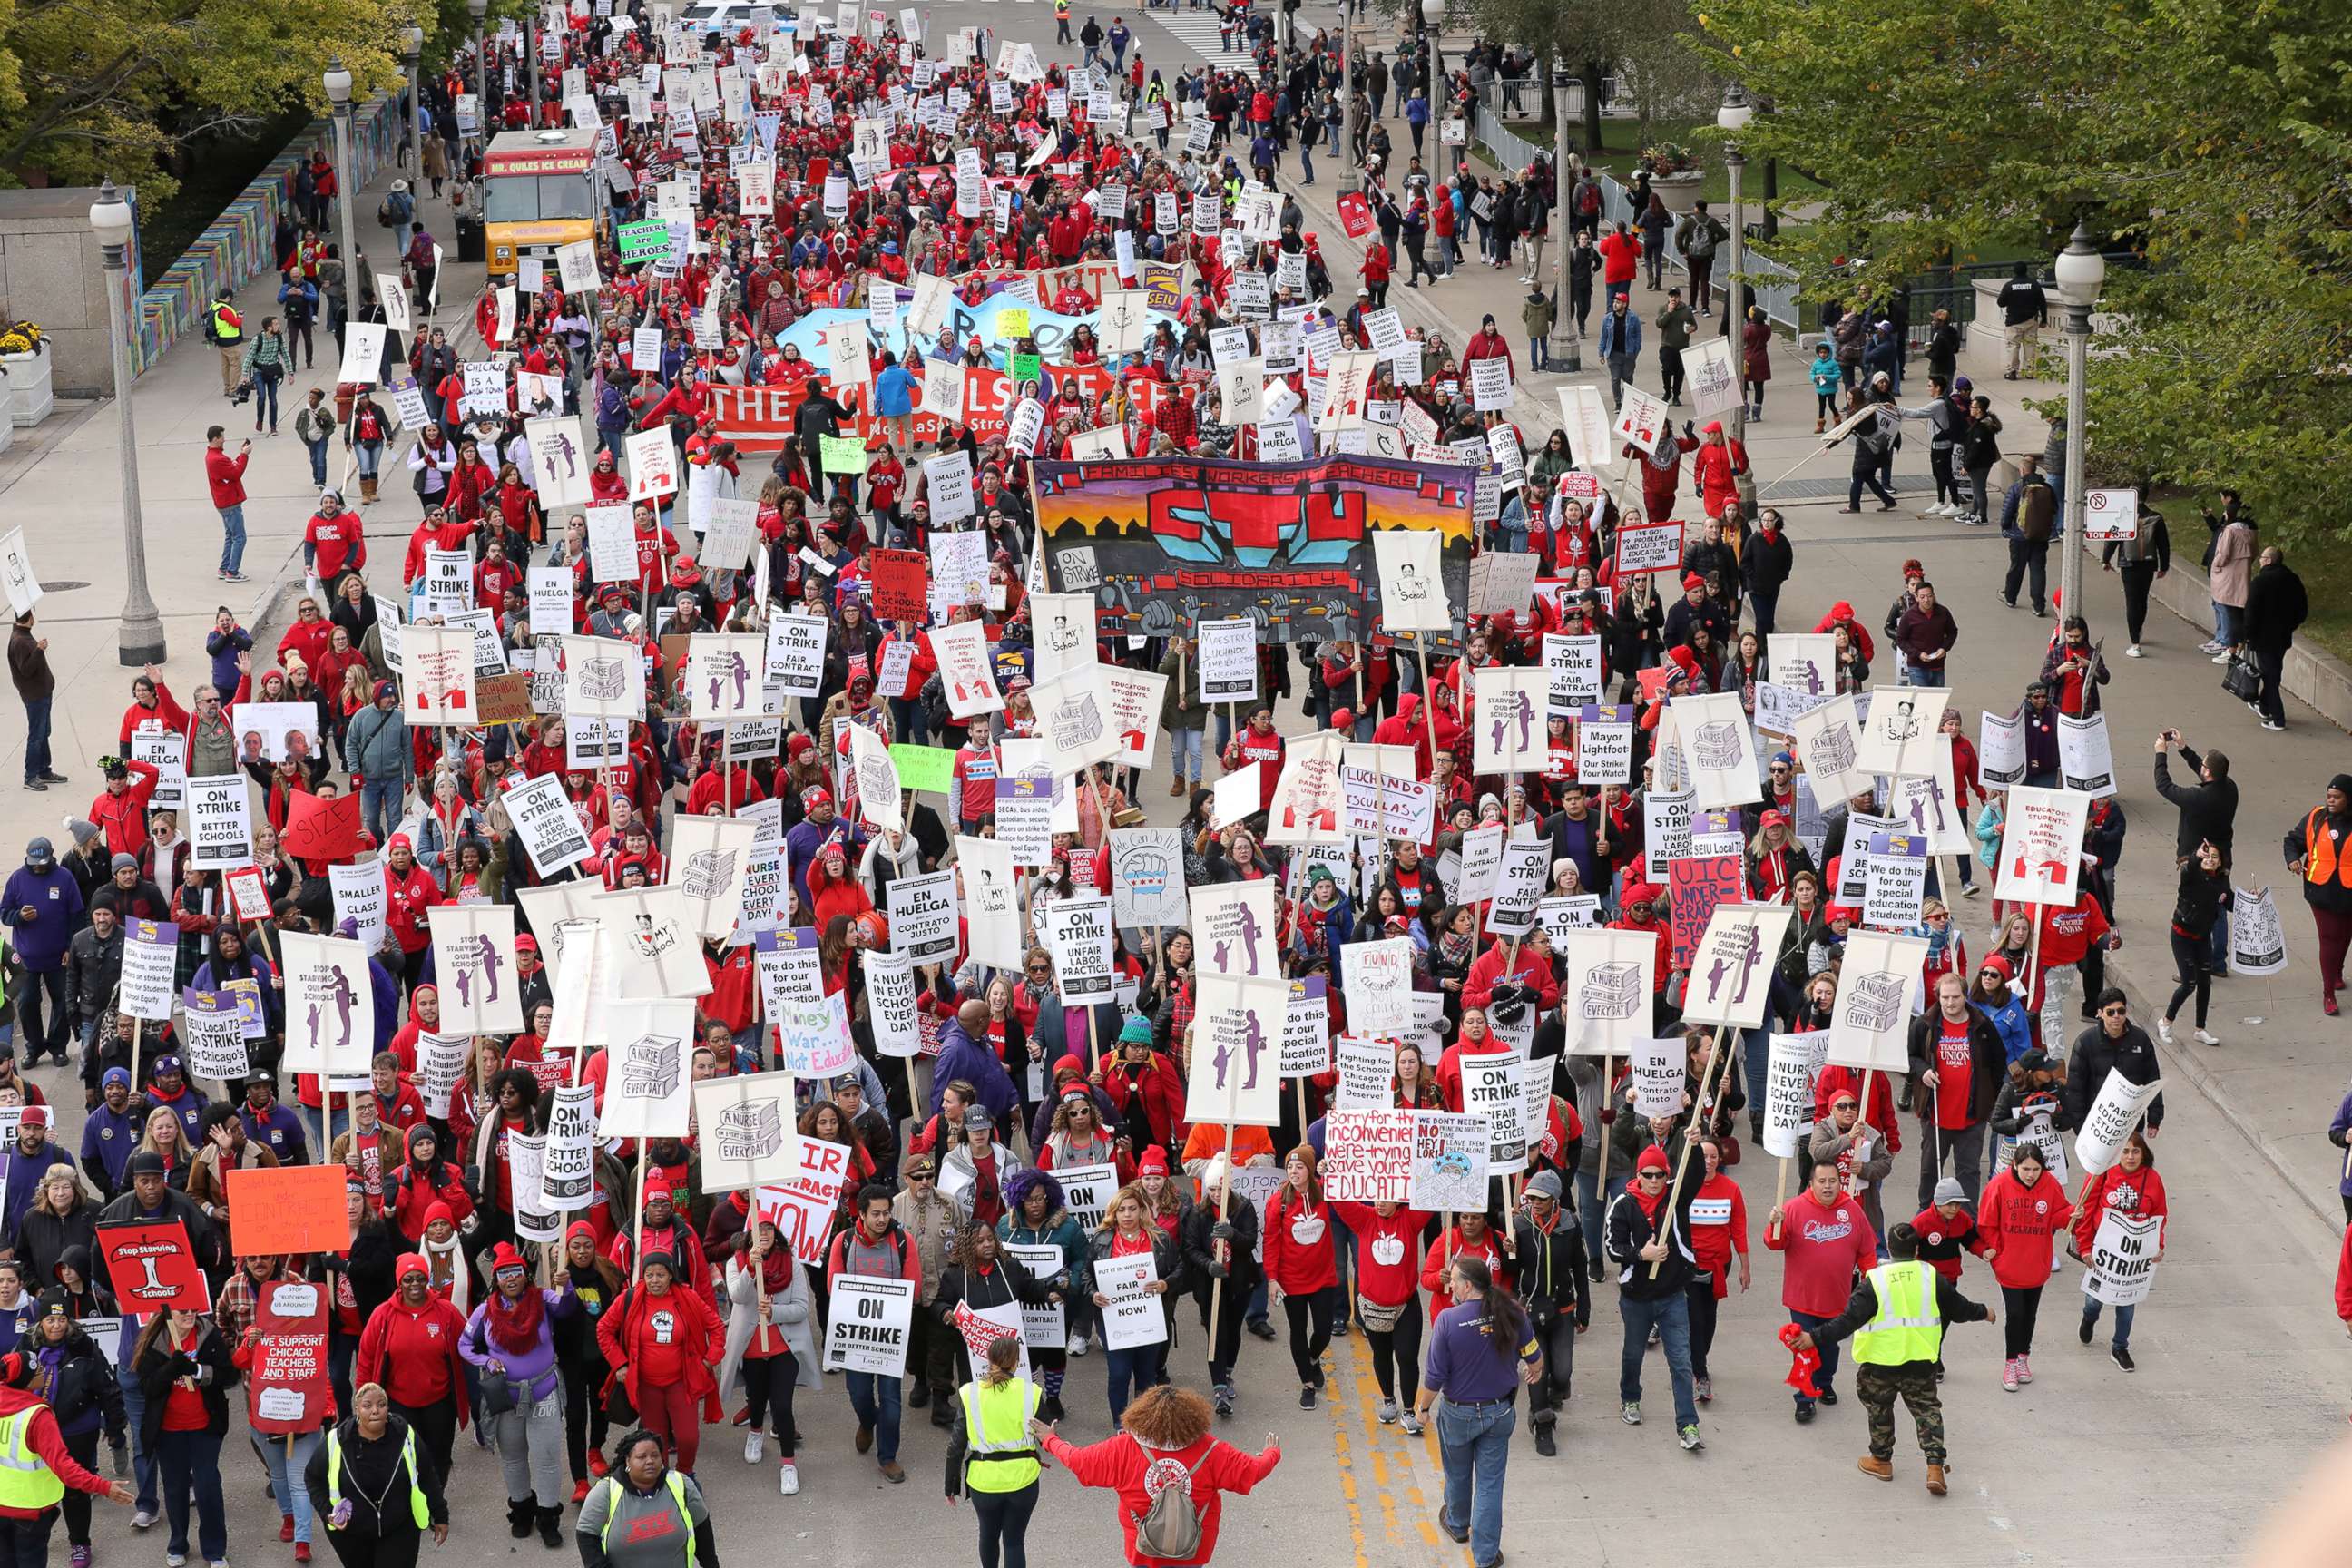 PHOTO: Teachers protest during a rally and march on the first day of a teacher strike in Chicago, Oct. 17, 2019.